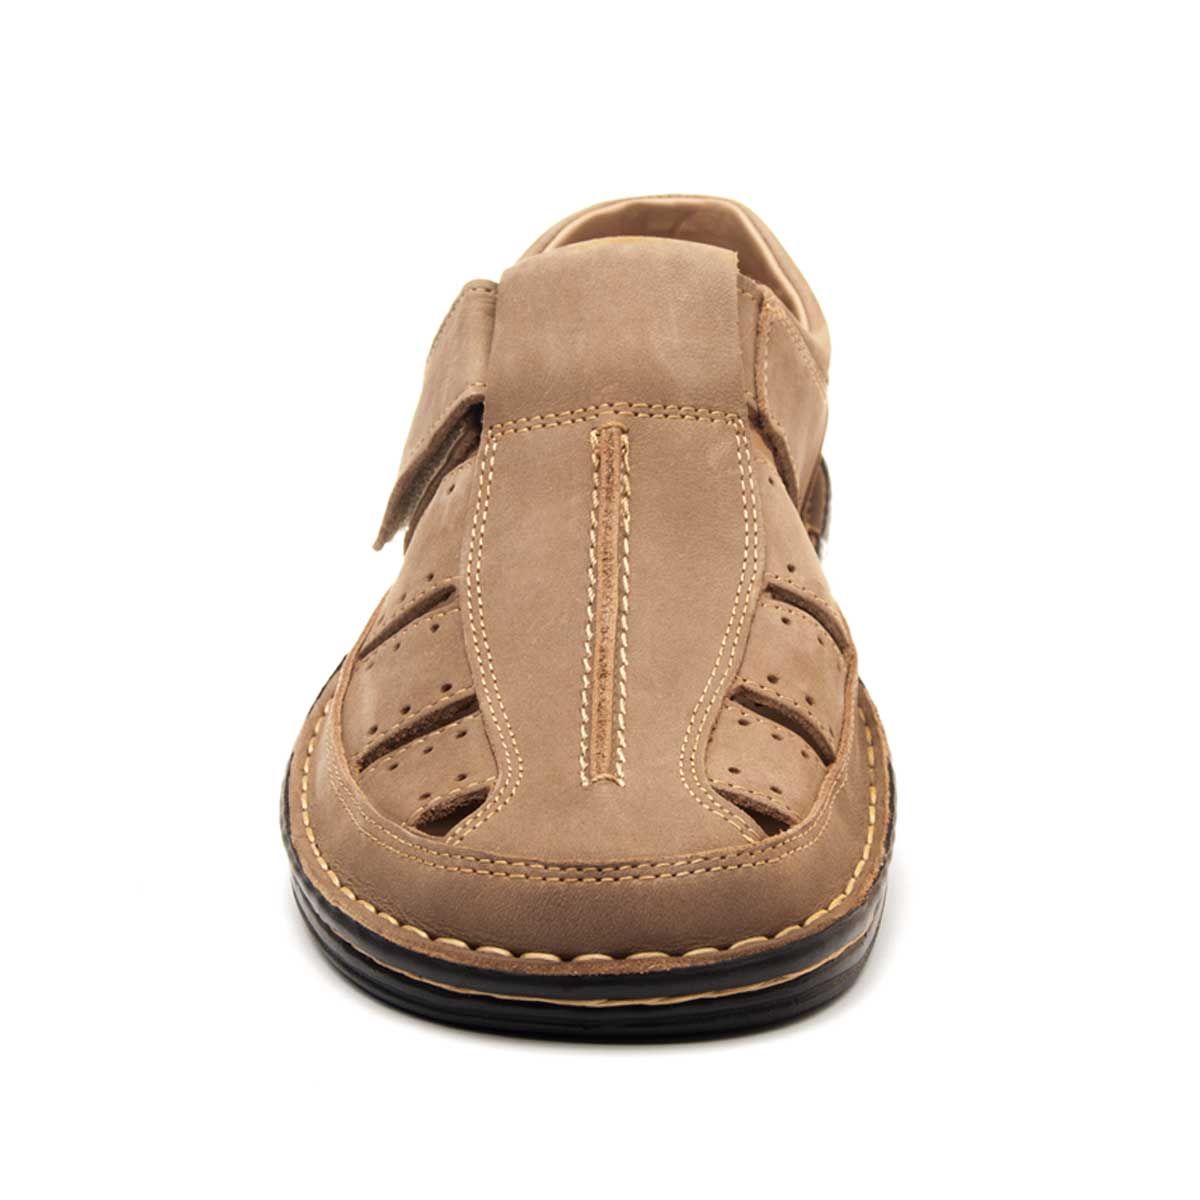 We present this ideal sandal for summer, because thanks to its flexibility and the smoothness of your skin, it is the perfect shoe so that your foot can feel especially comfortable. It is manufactured in natural skin of first quality, very soft and easy to clean and care. The floor is flexible rubber and non-slip, it also has a relief on the sole that favors comfort and grip. It has a very comfortable and adaptable to the foot. Made in Spain in a traditional way and without chrome 6. No doubt the perfect choice for our day by day.